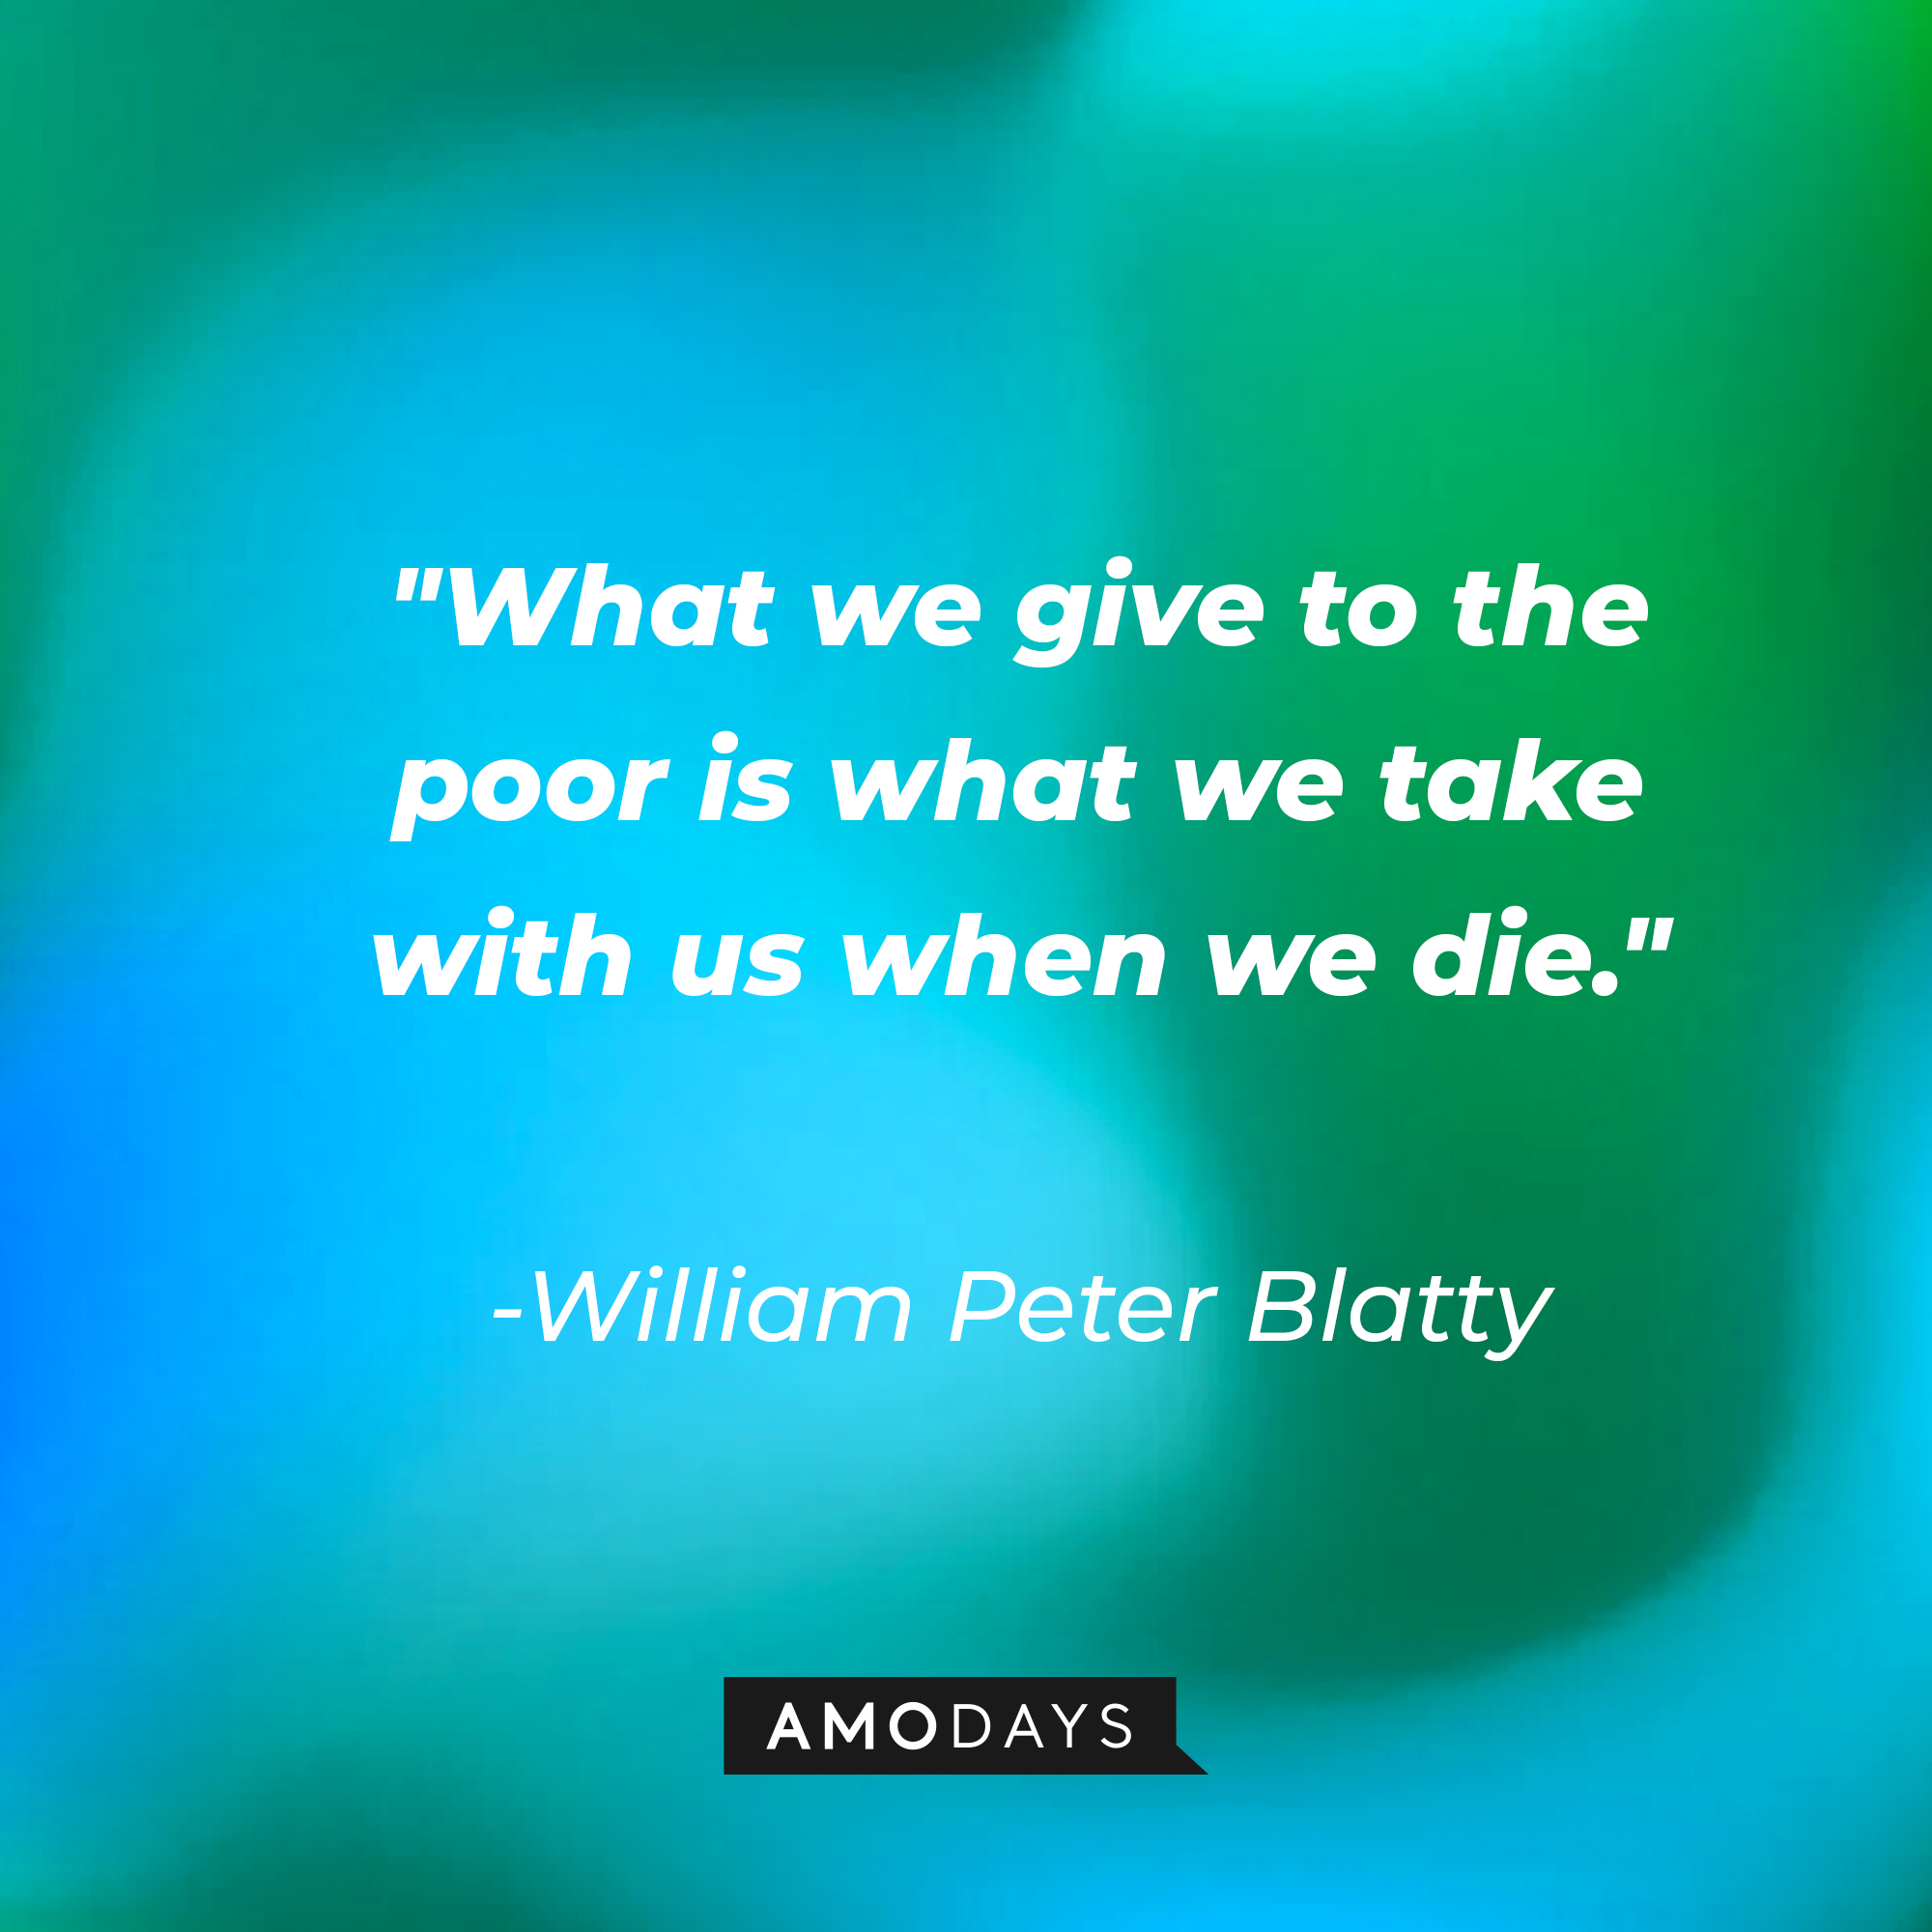 William Peter Blatty's quote: "What we give to the poor is what we take with us when we die." | Source: AmoDays